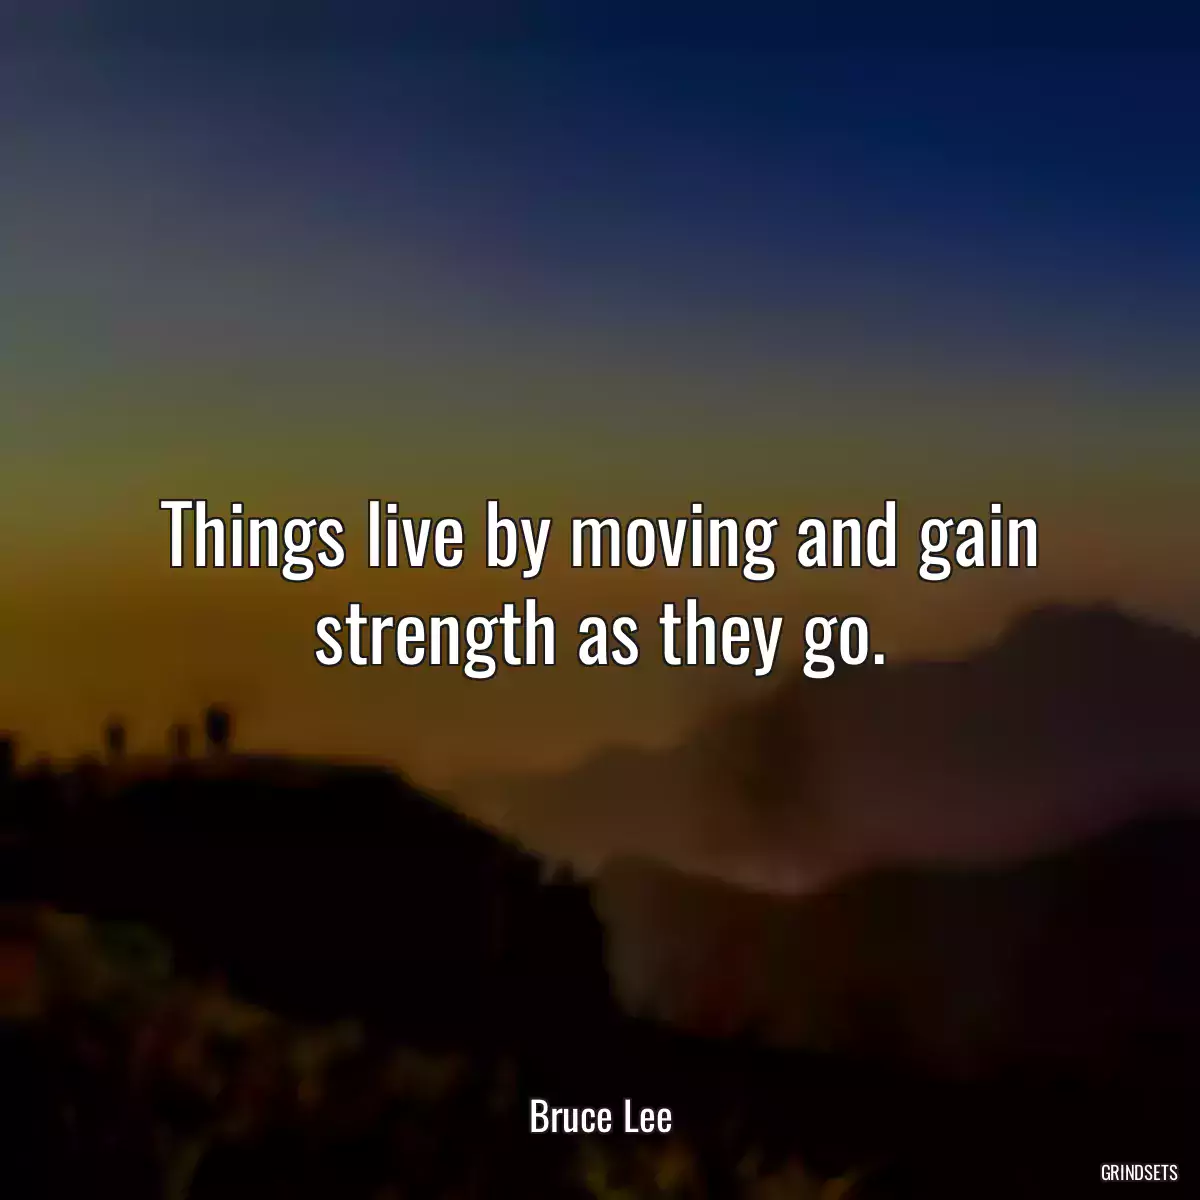 Things live by moving and gain strength as they go.